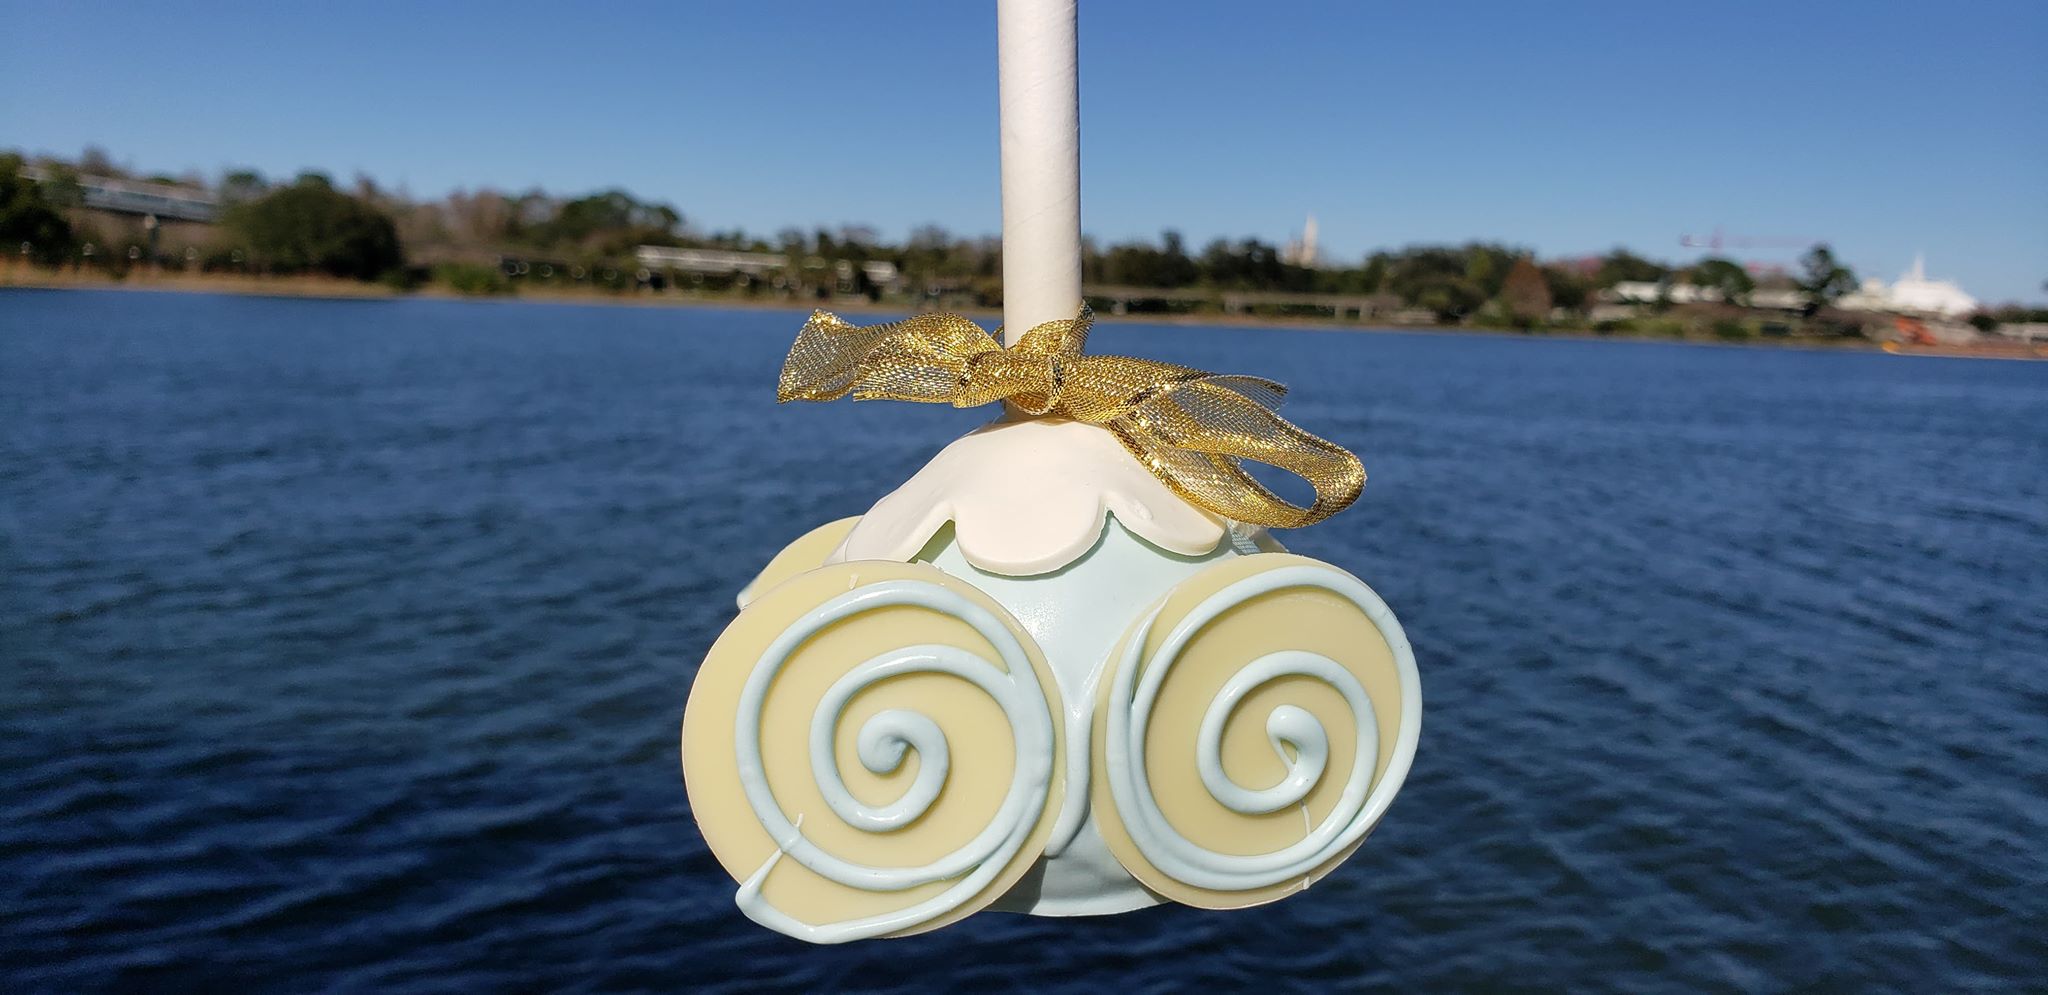 Cinderella’s 70th Anniversary Carriage Cake Pop Making Its Way to the Grand Floridian